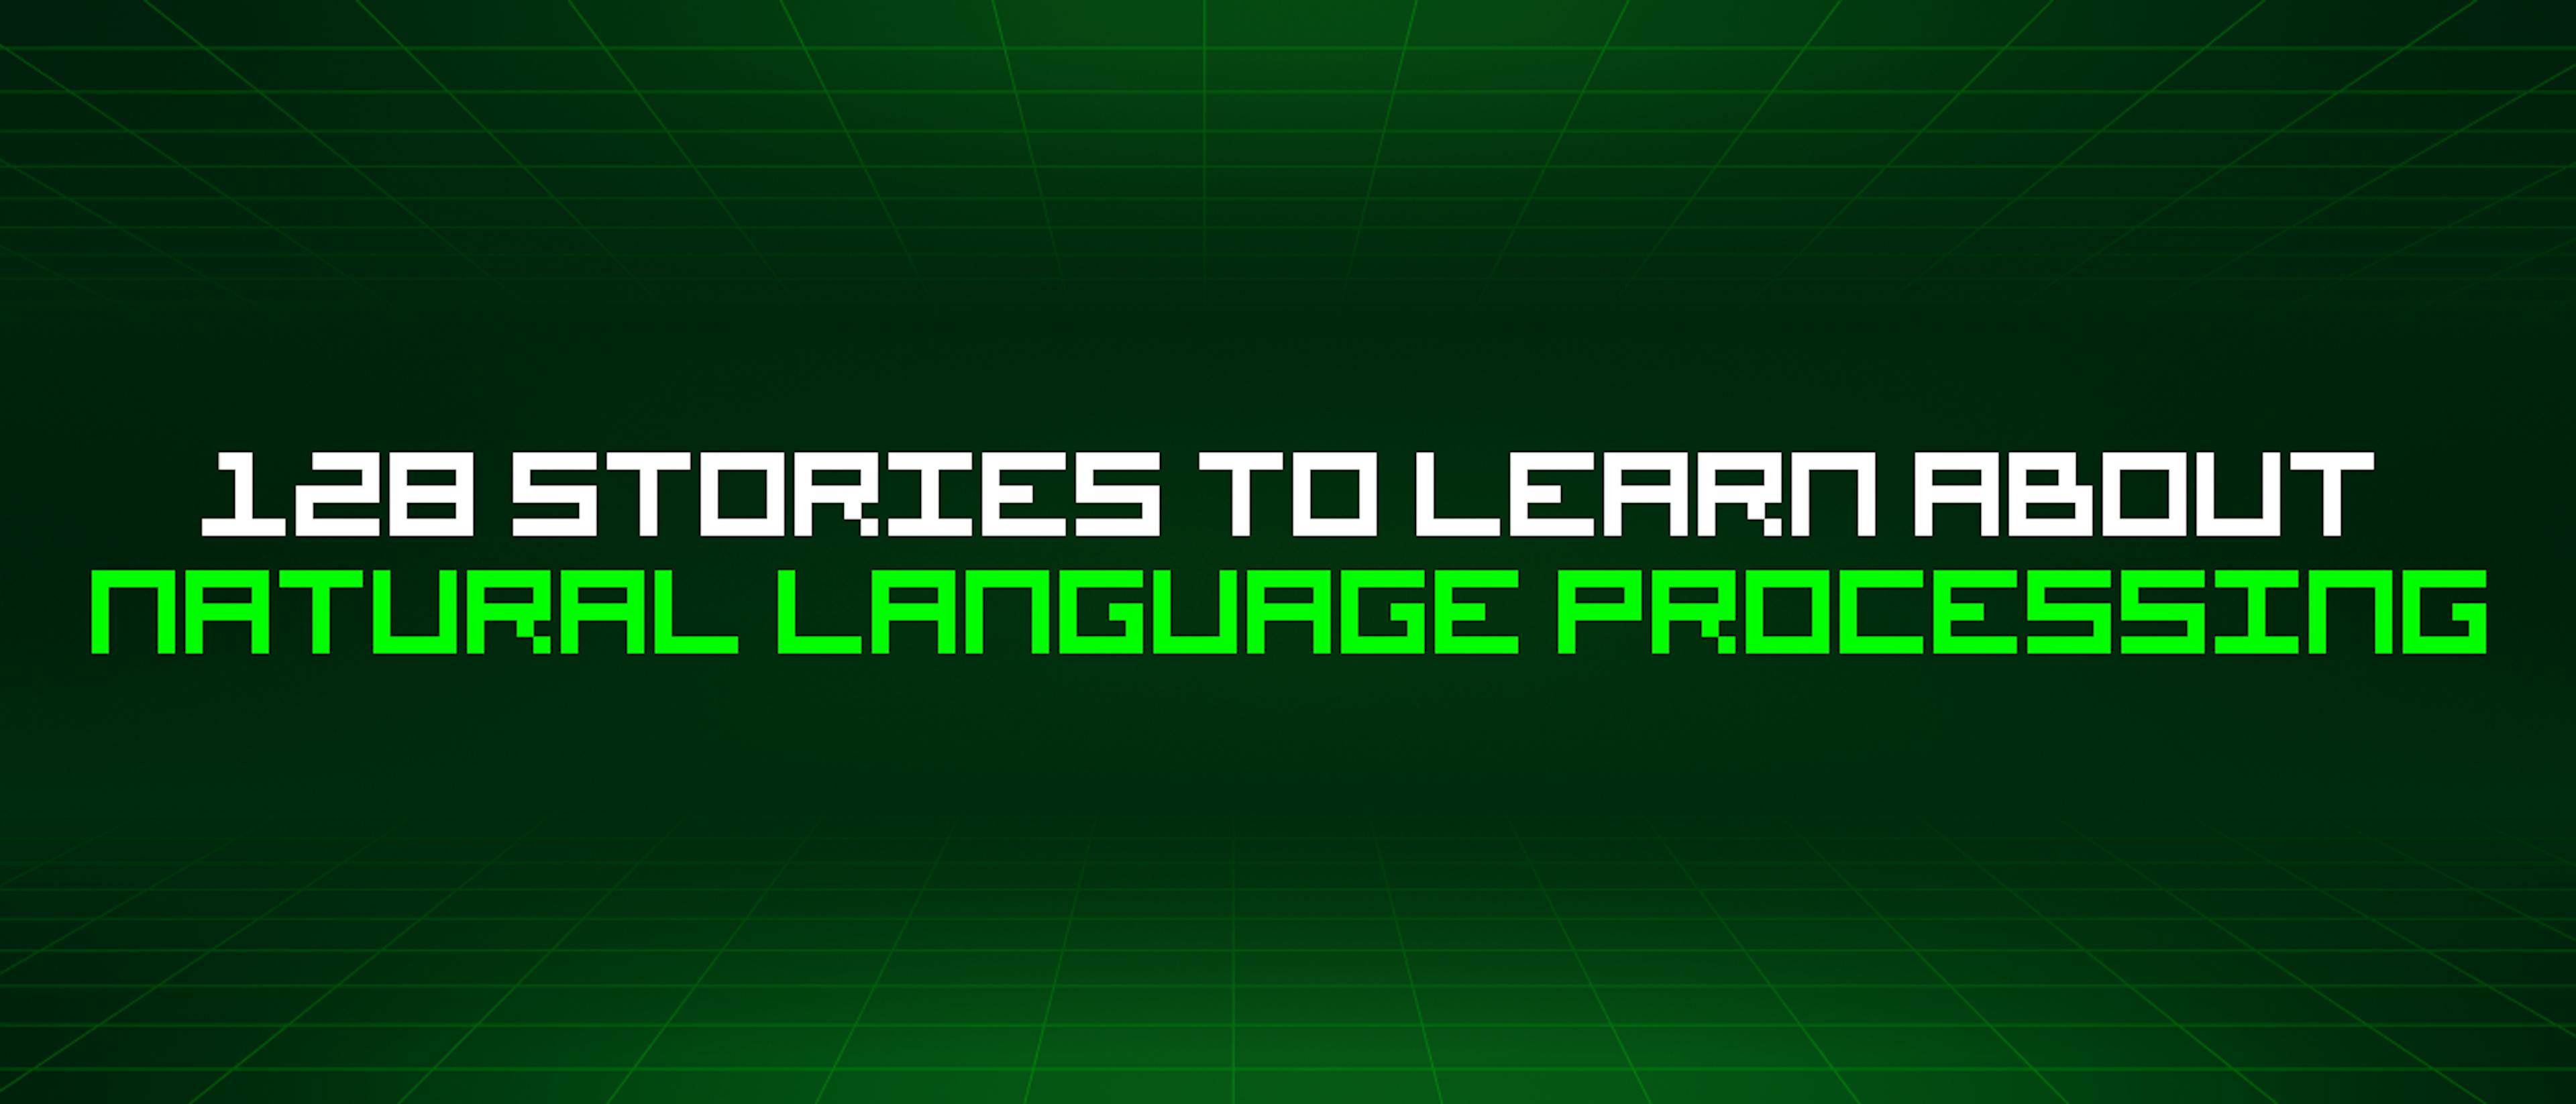 featured image - 128 Stories To Learn About Natural Language Processing